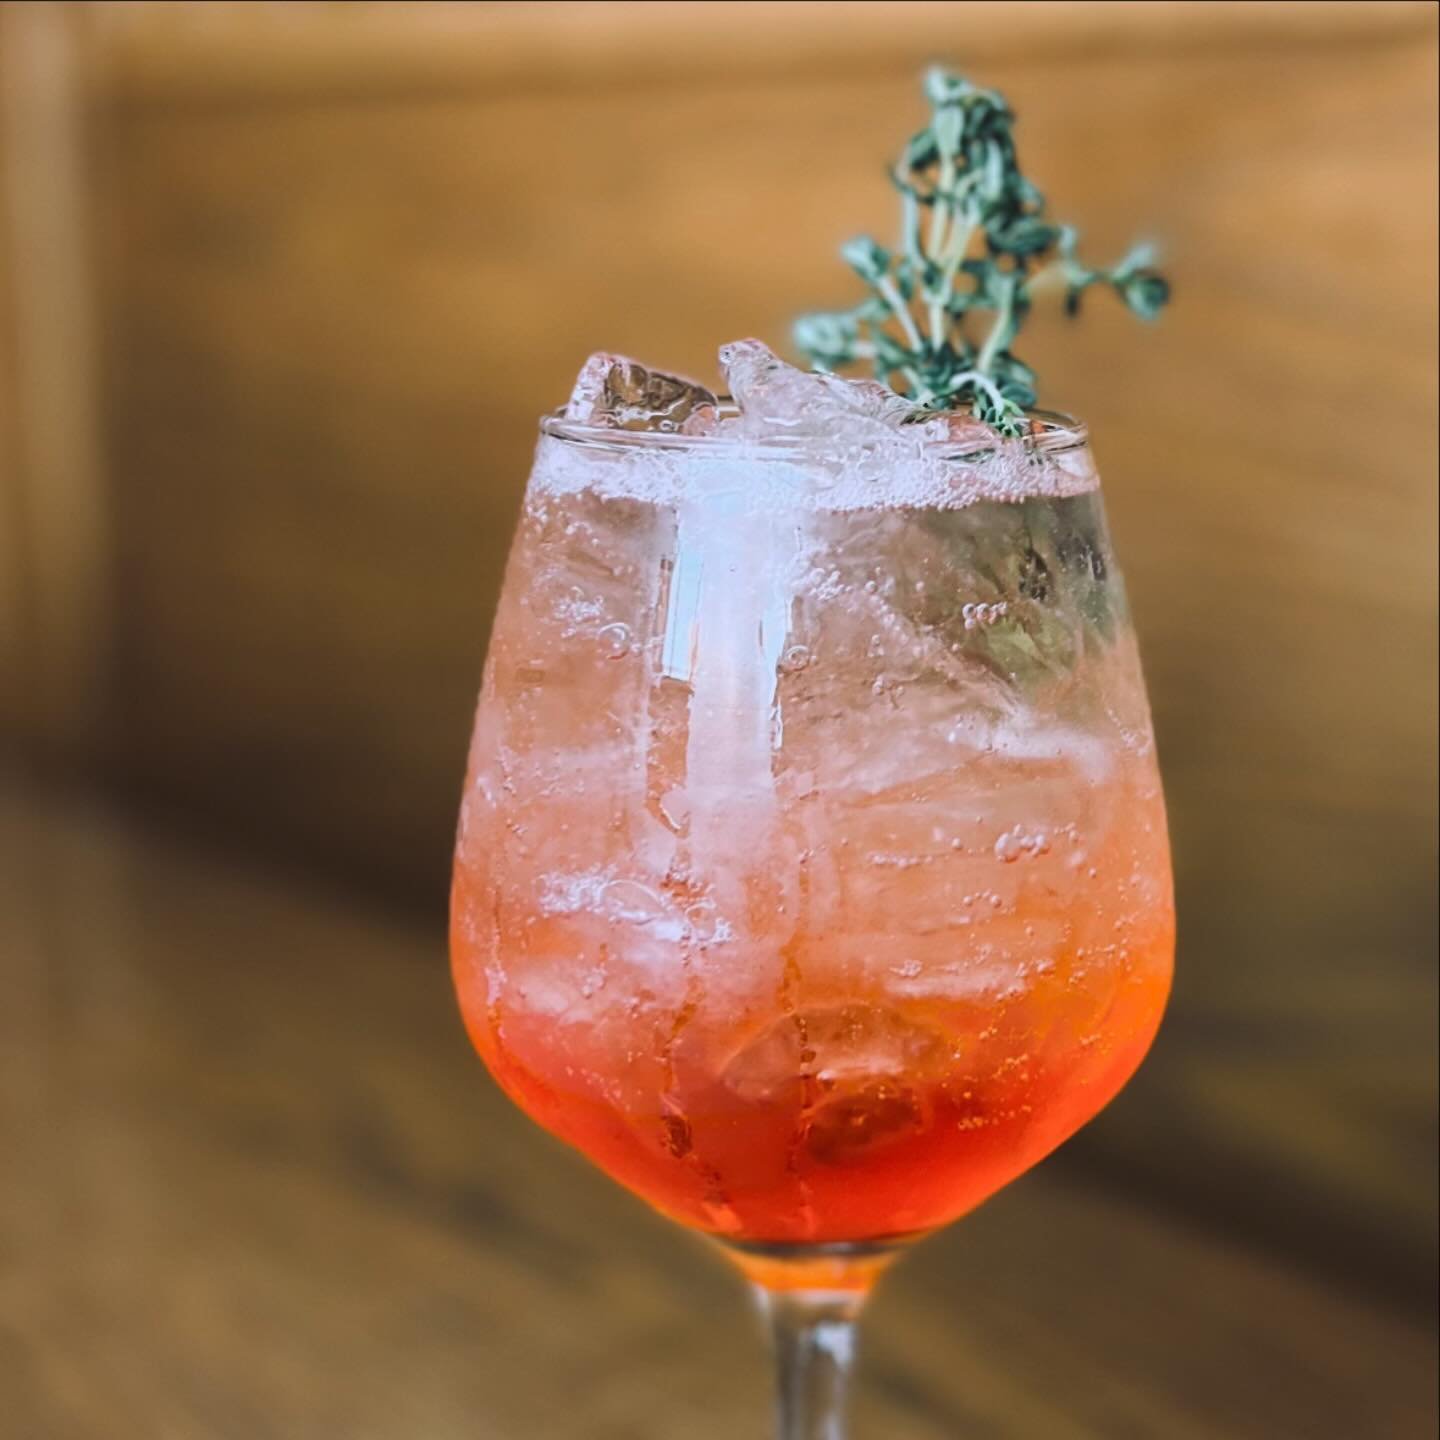 🌿 Thyme &amp; Blood Orange Aperol Spritz 🍹🧀 Crispy Fried Burrata 🍅

Refresh Your Day: Try our new Thyme &amp; Blood Orange Aperol Spritz. Perfect for a relaxing Spring evening. 

Simple Pleasures: Enjoy our Crispy Fried Burrata, served on a bed o